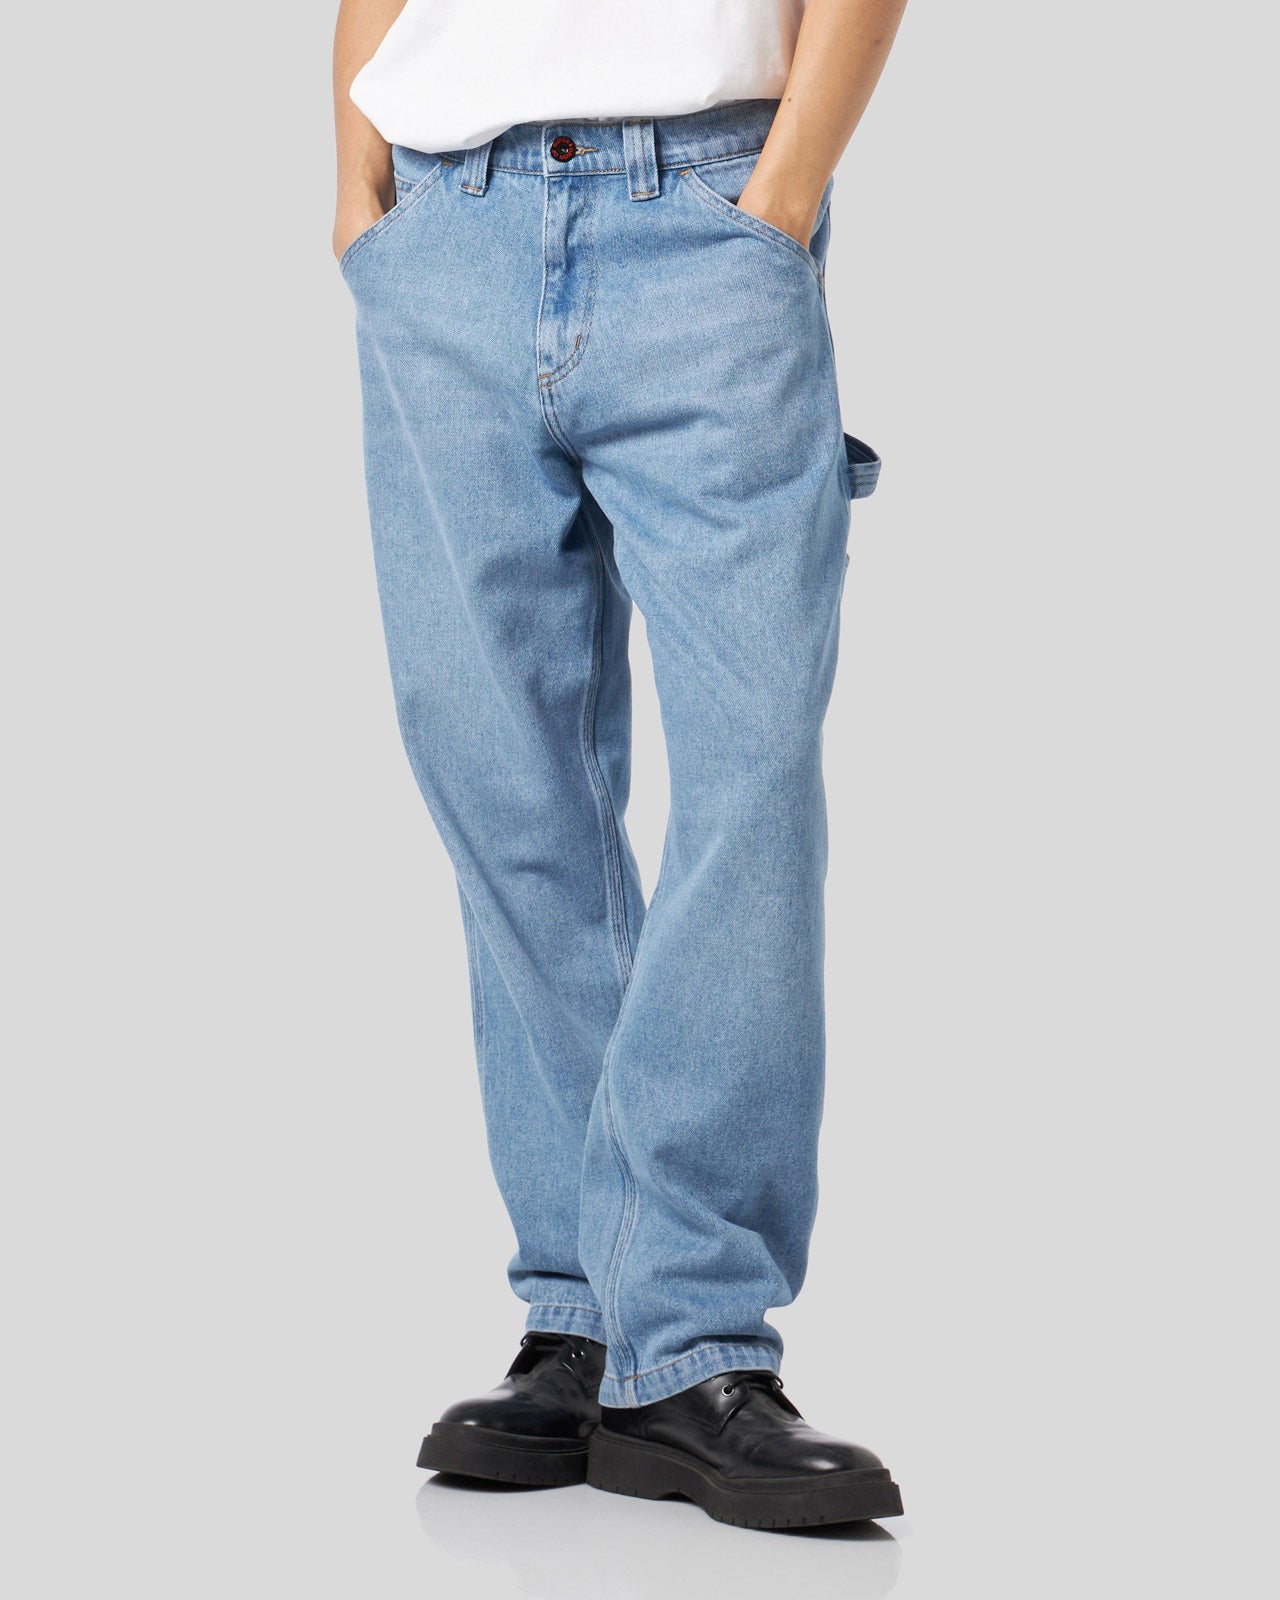 WORKER DENIM PANTS WITH ICONIC FLAMES PATCH